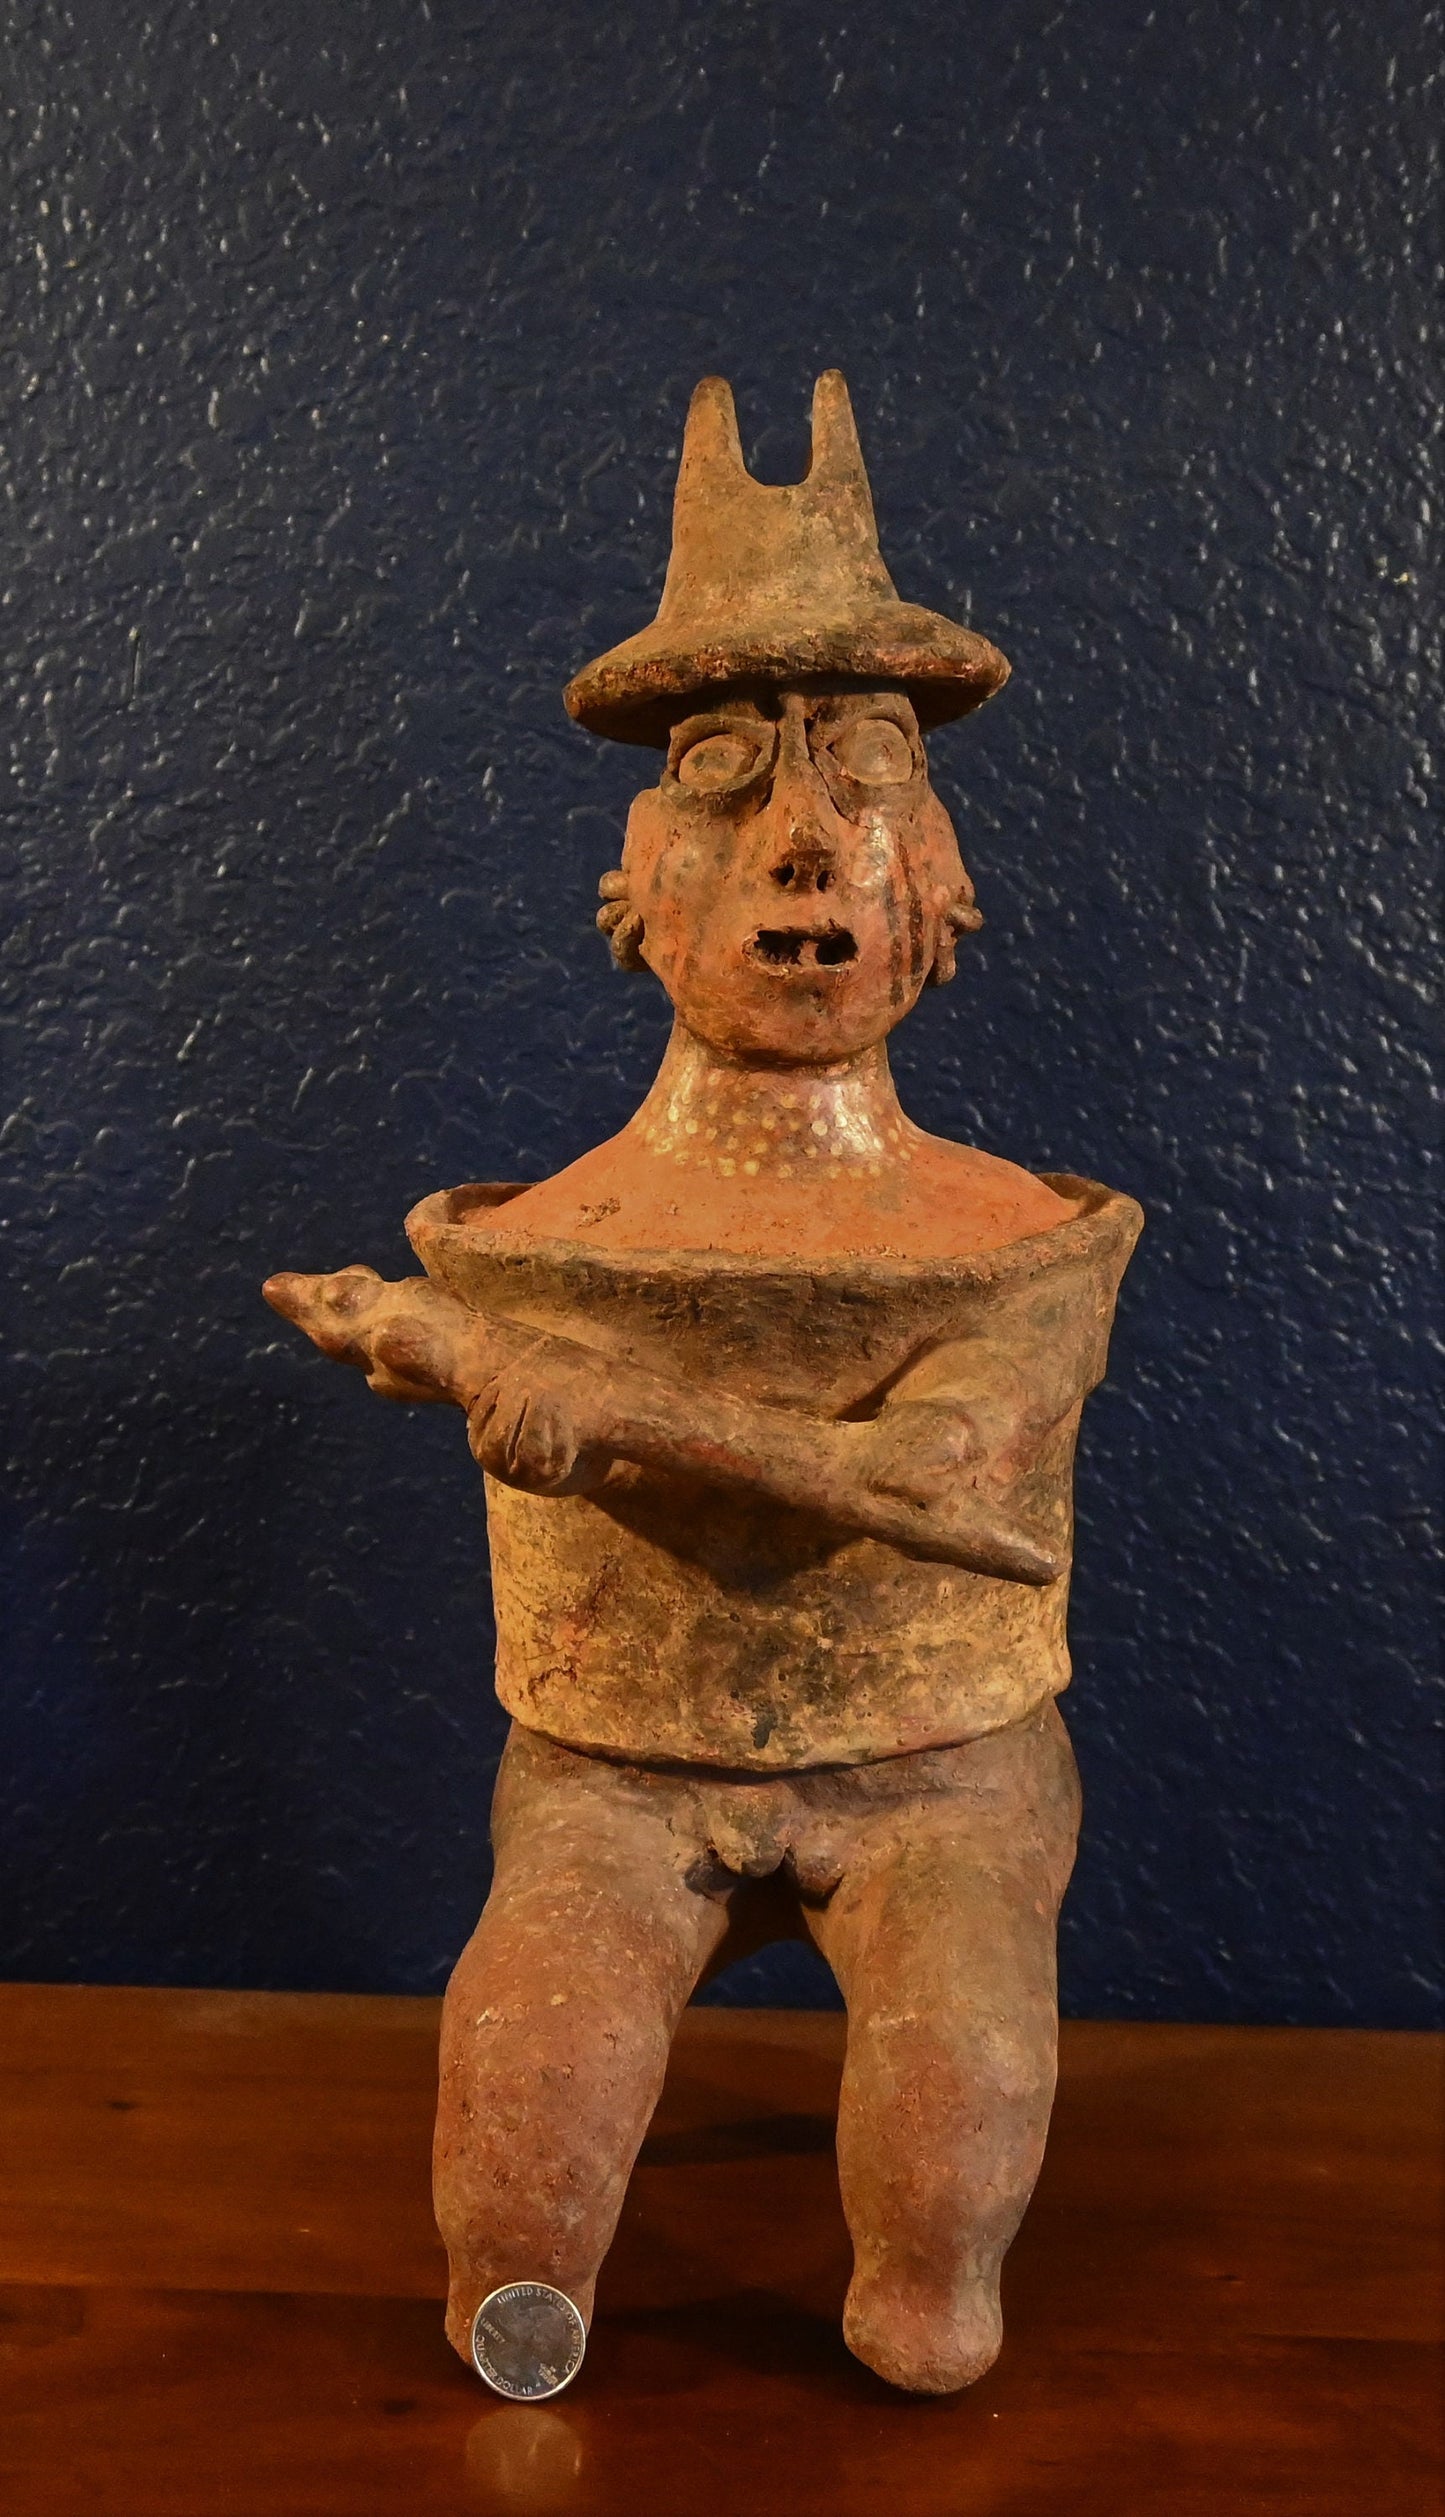 Large (17 5/8 inches) Authentic Nayarit, ca. 100 BCE to 250 CE Pre-Columbian Barrel Seated Warrior w/ Certificate Authenticity & Provenance